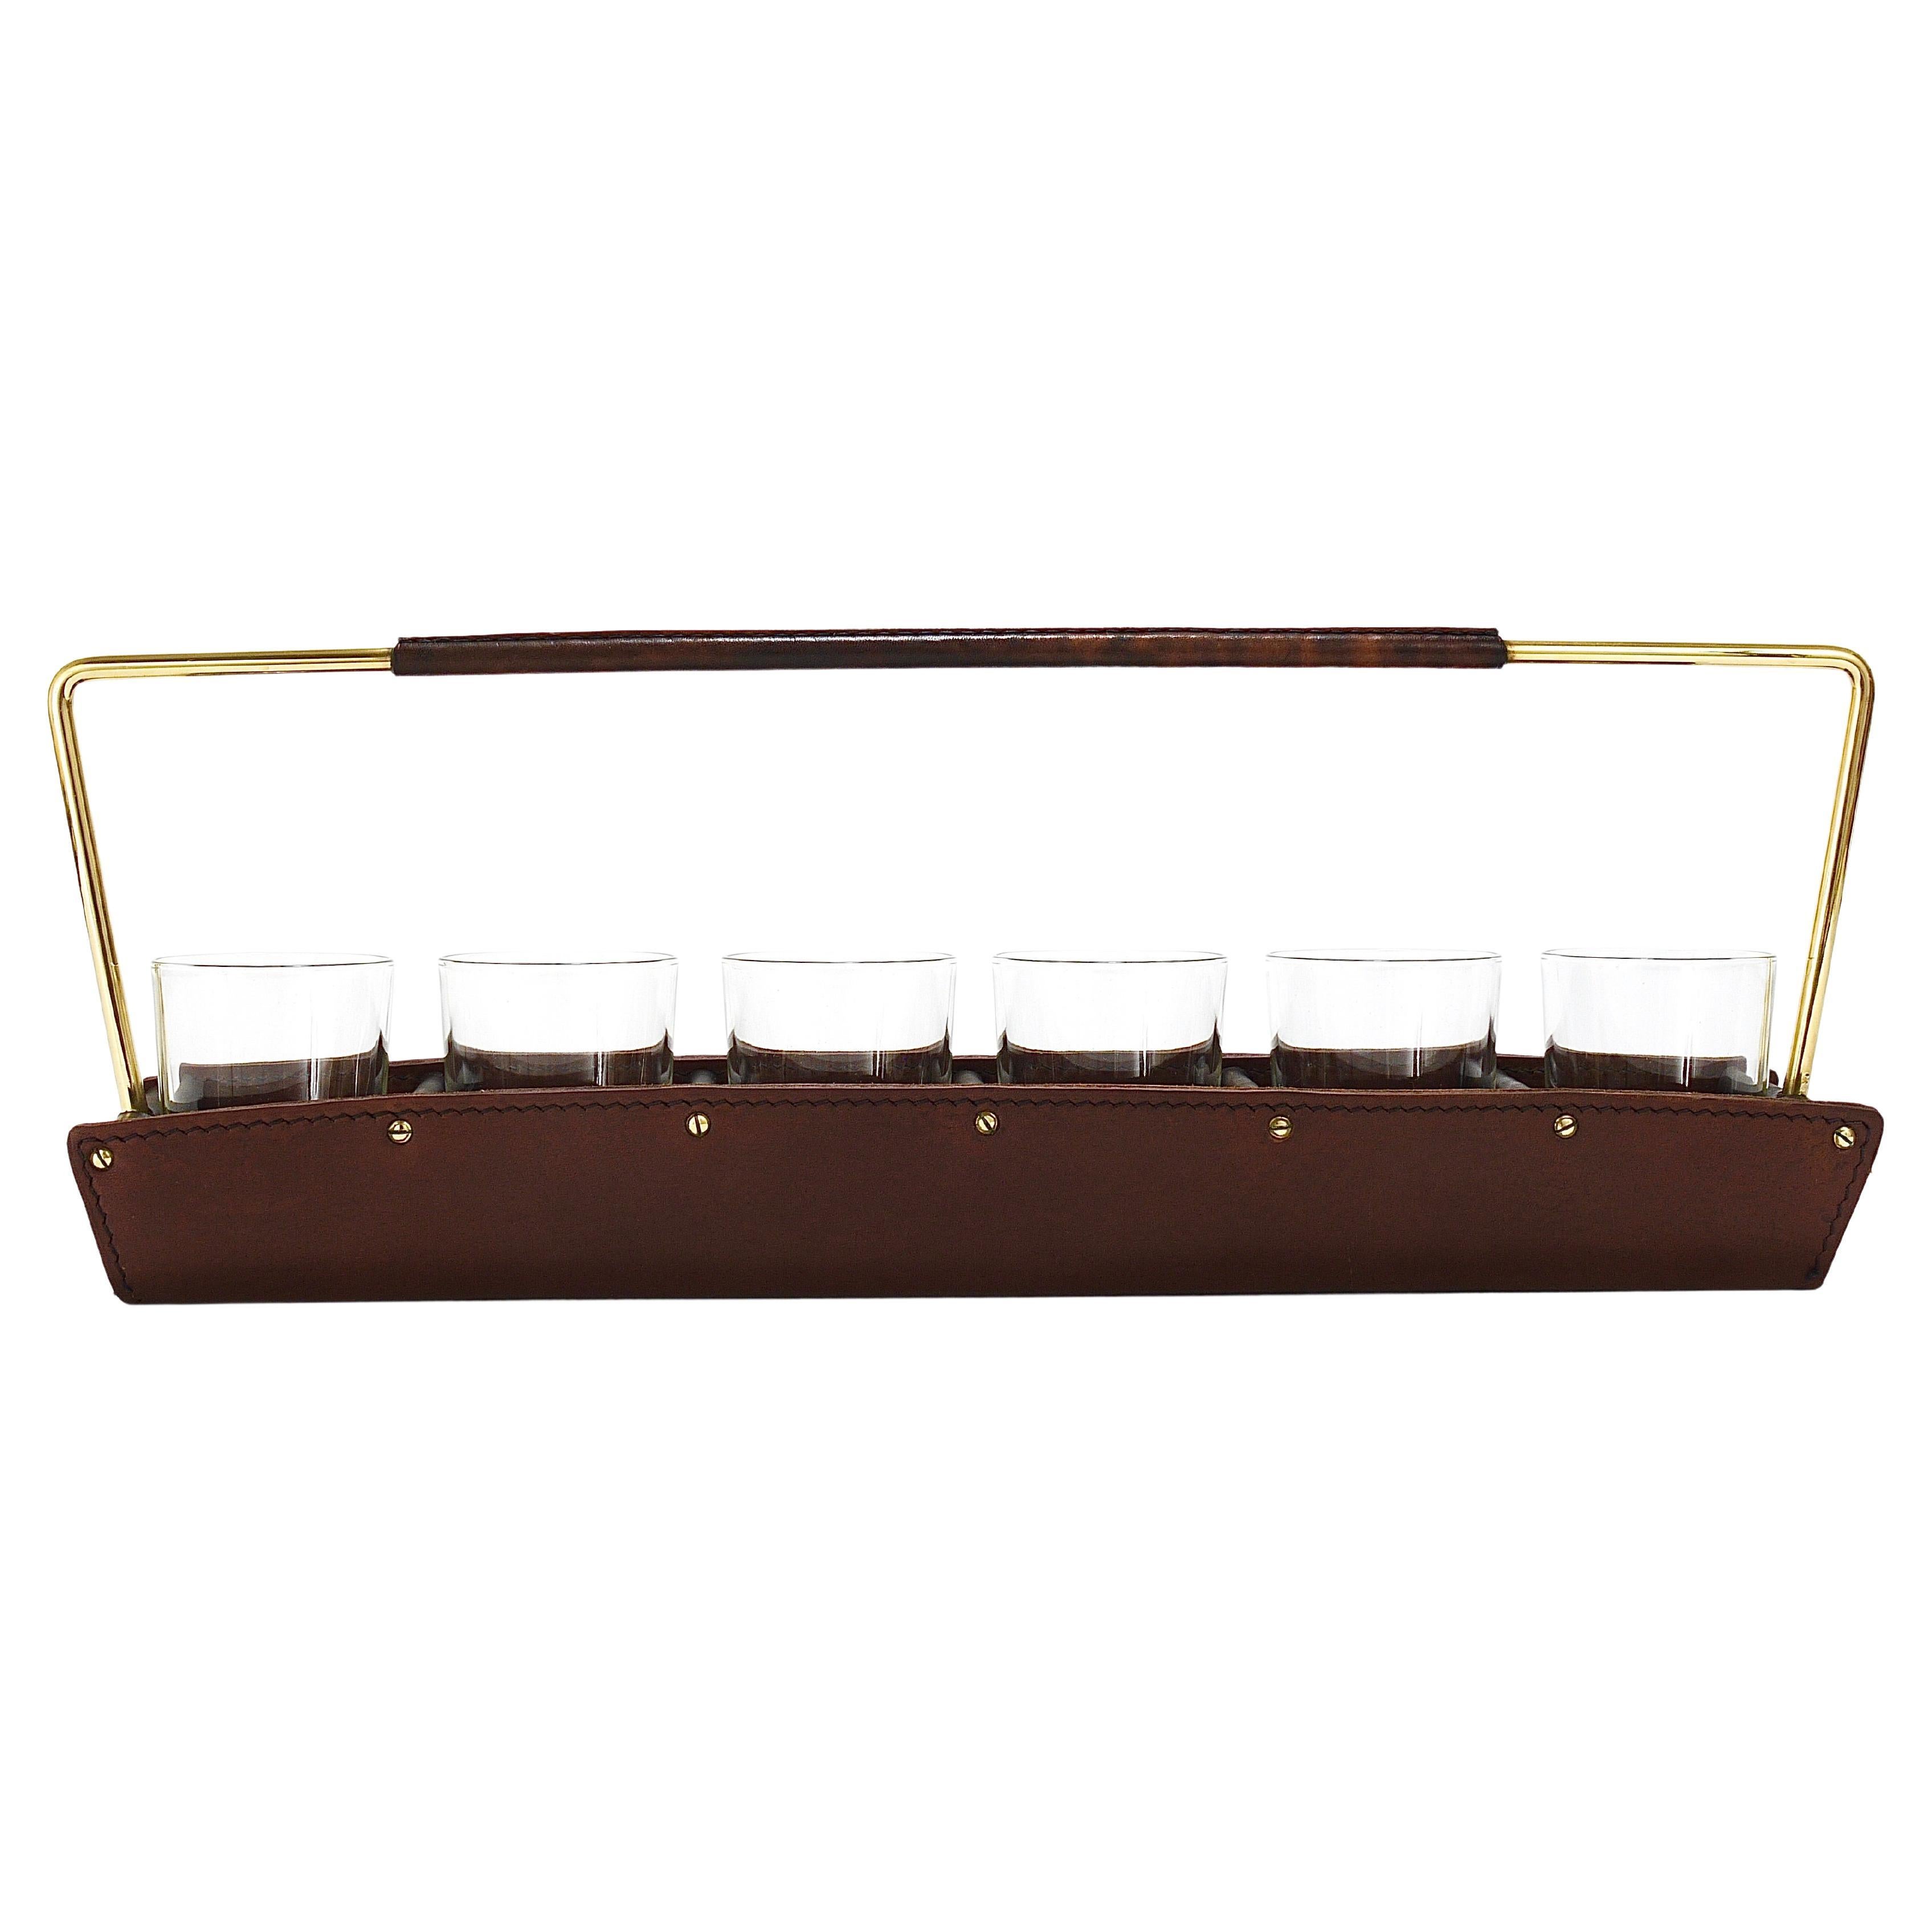 Carl Auböck II Drinking Glass Carrying Rack, Leather & Brass, Austria 1950s For Sale